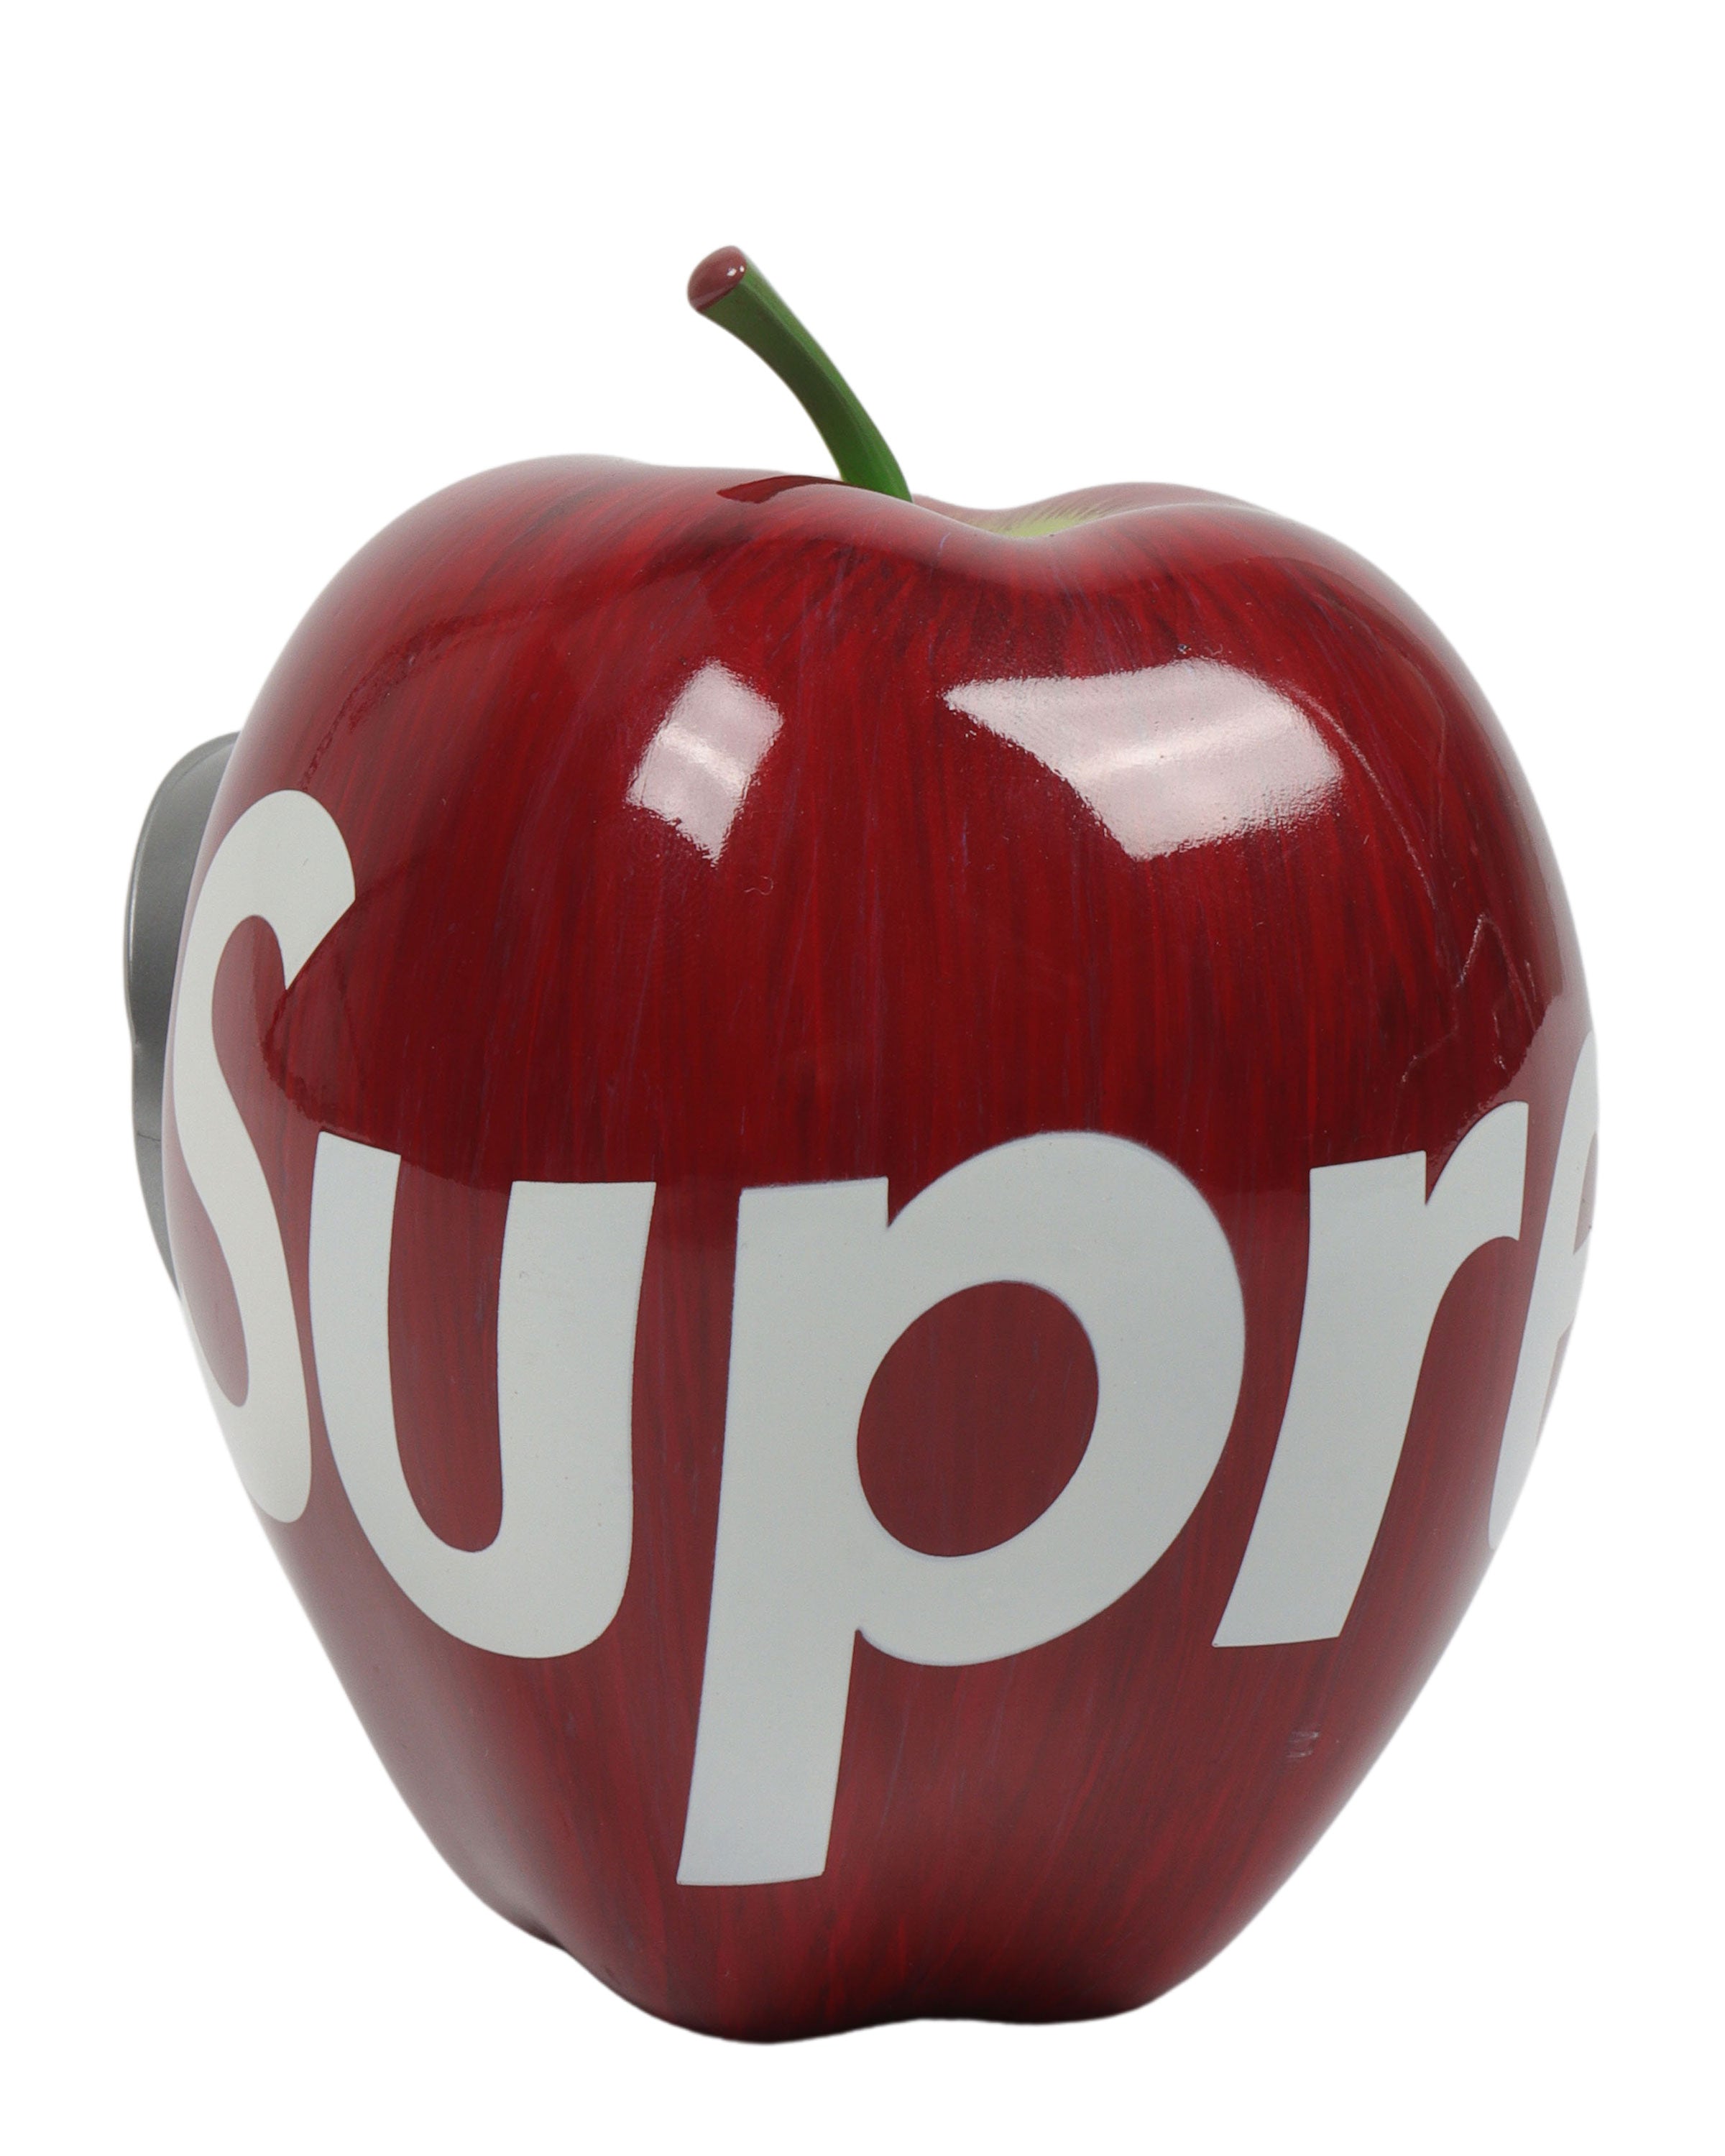 Supreme Undercover Gilapple Light FW 2016 Red